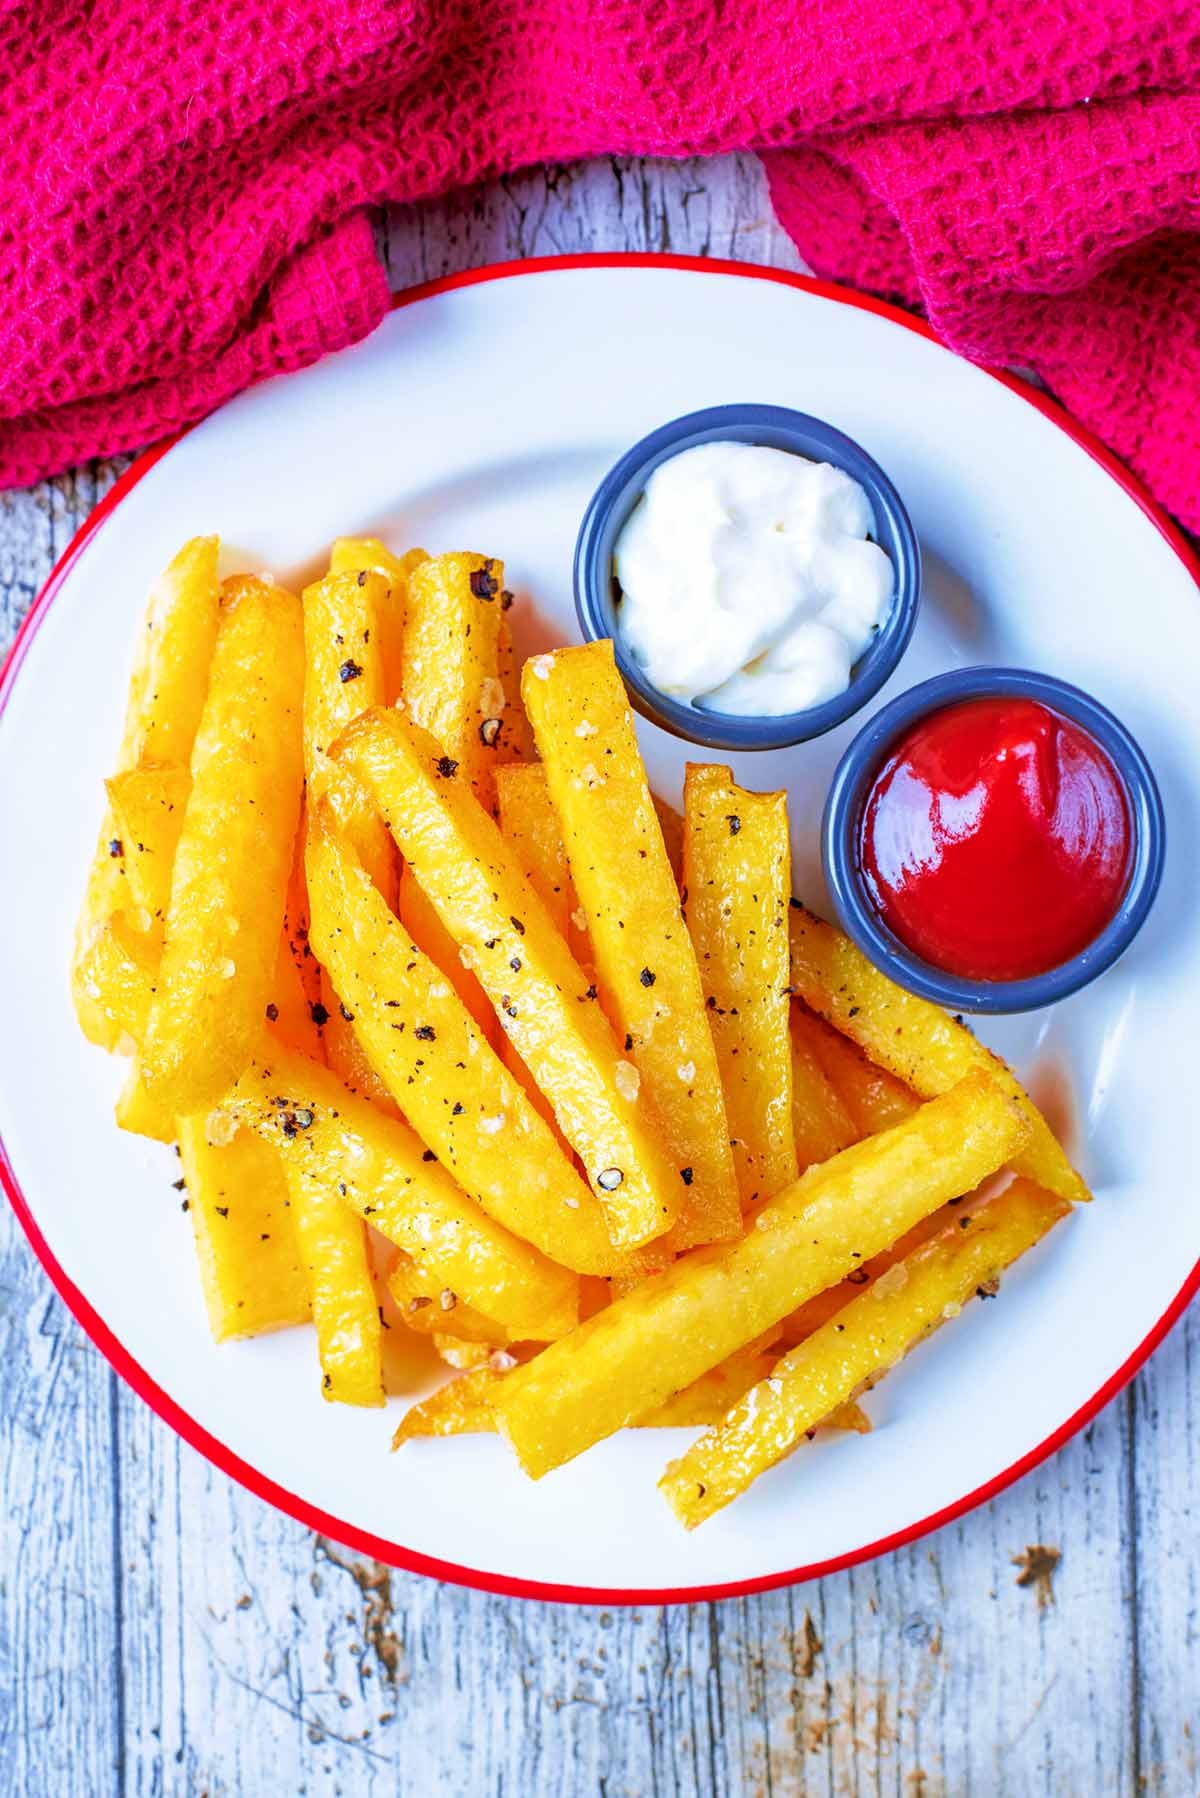 A plate of polenta fries next to a red towel.